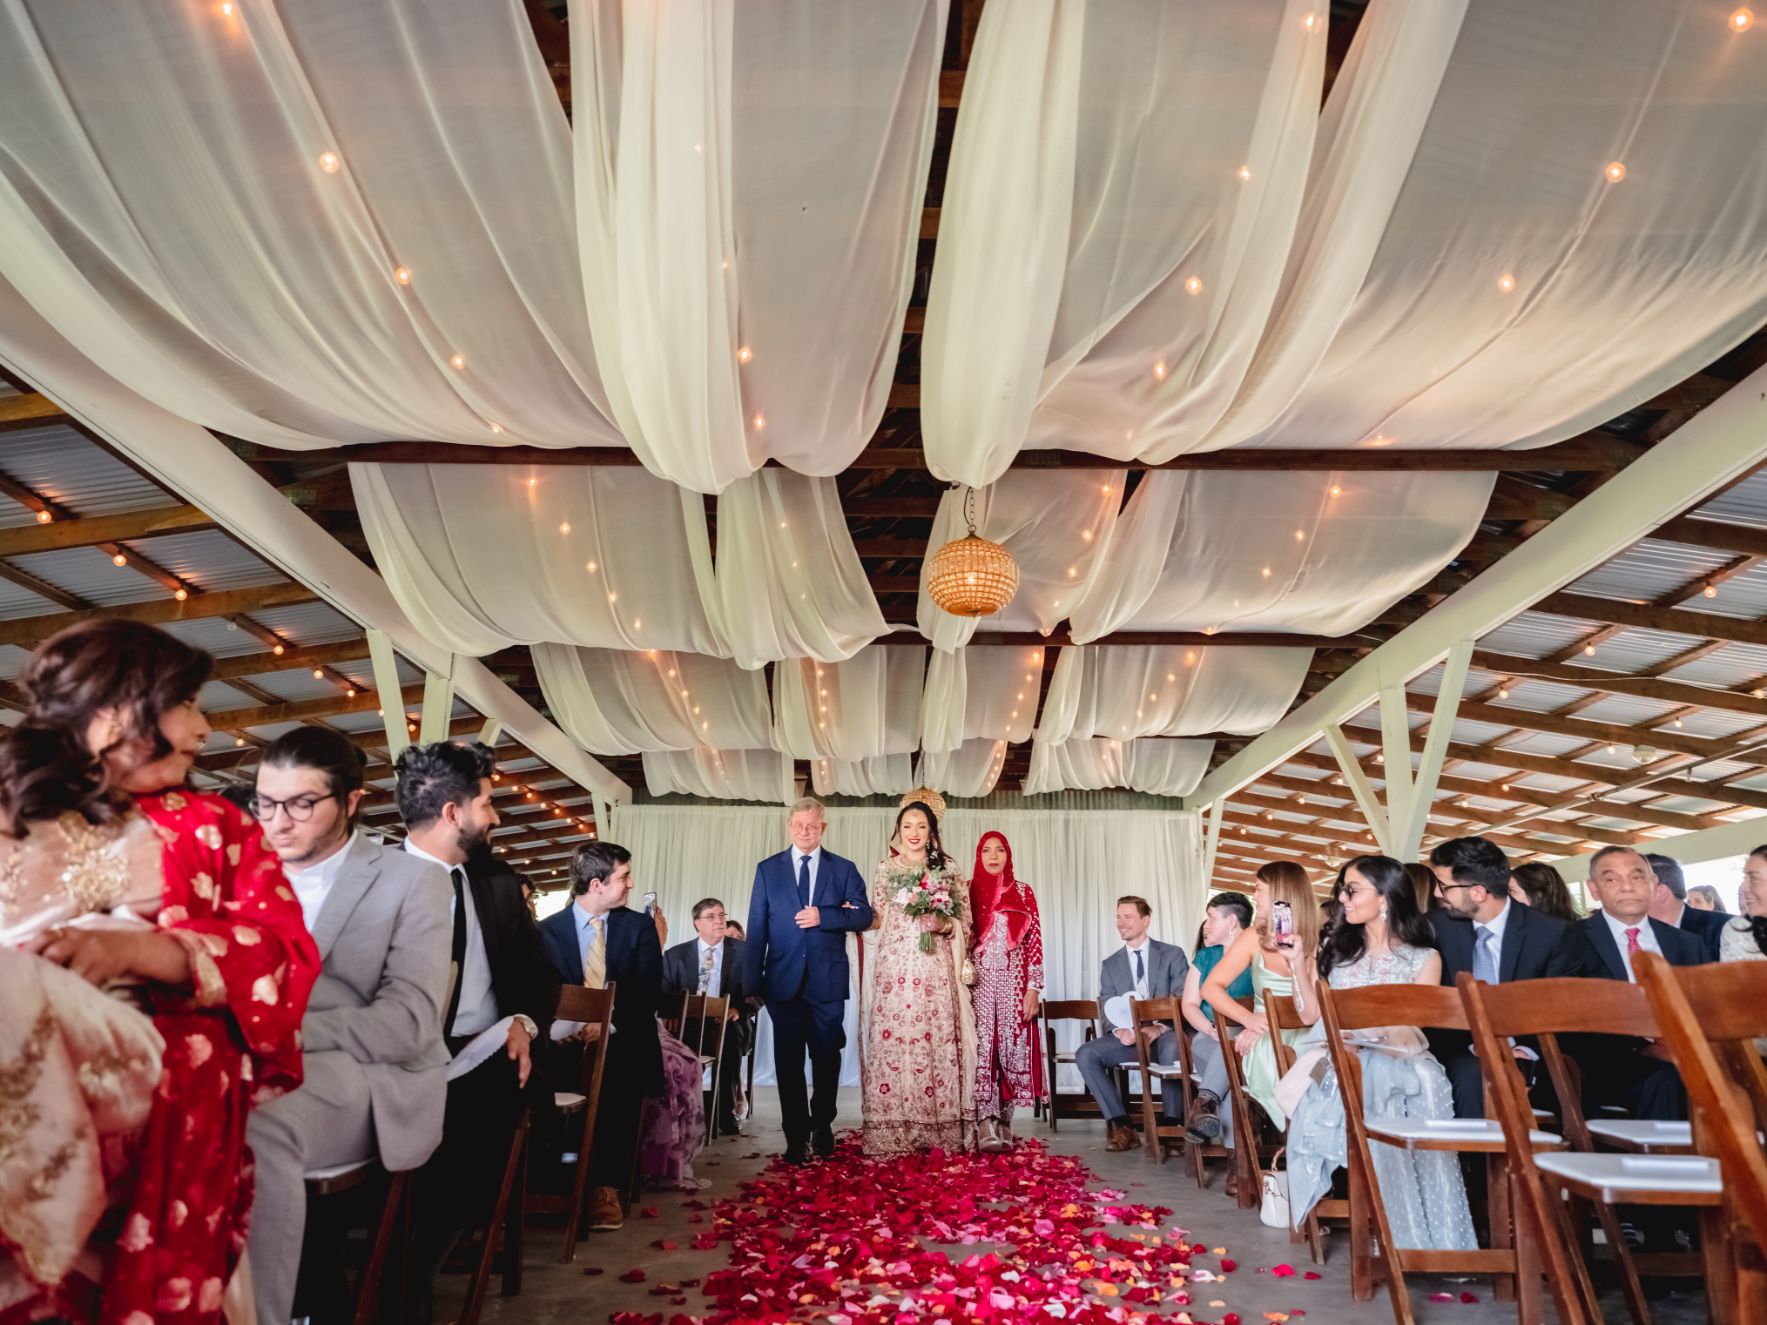 A bride wearing ethnic wedding garments is walking down the ceremony aisle with red flowers on the floor at Pecan Spring Ranch wedding venue. Guest are seated in brown wood chairs. 